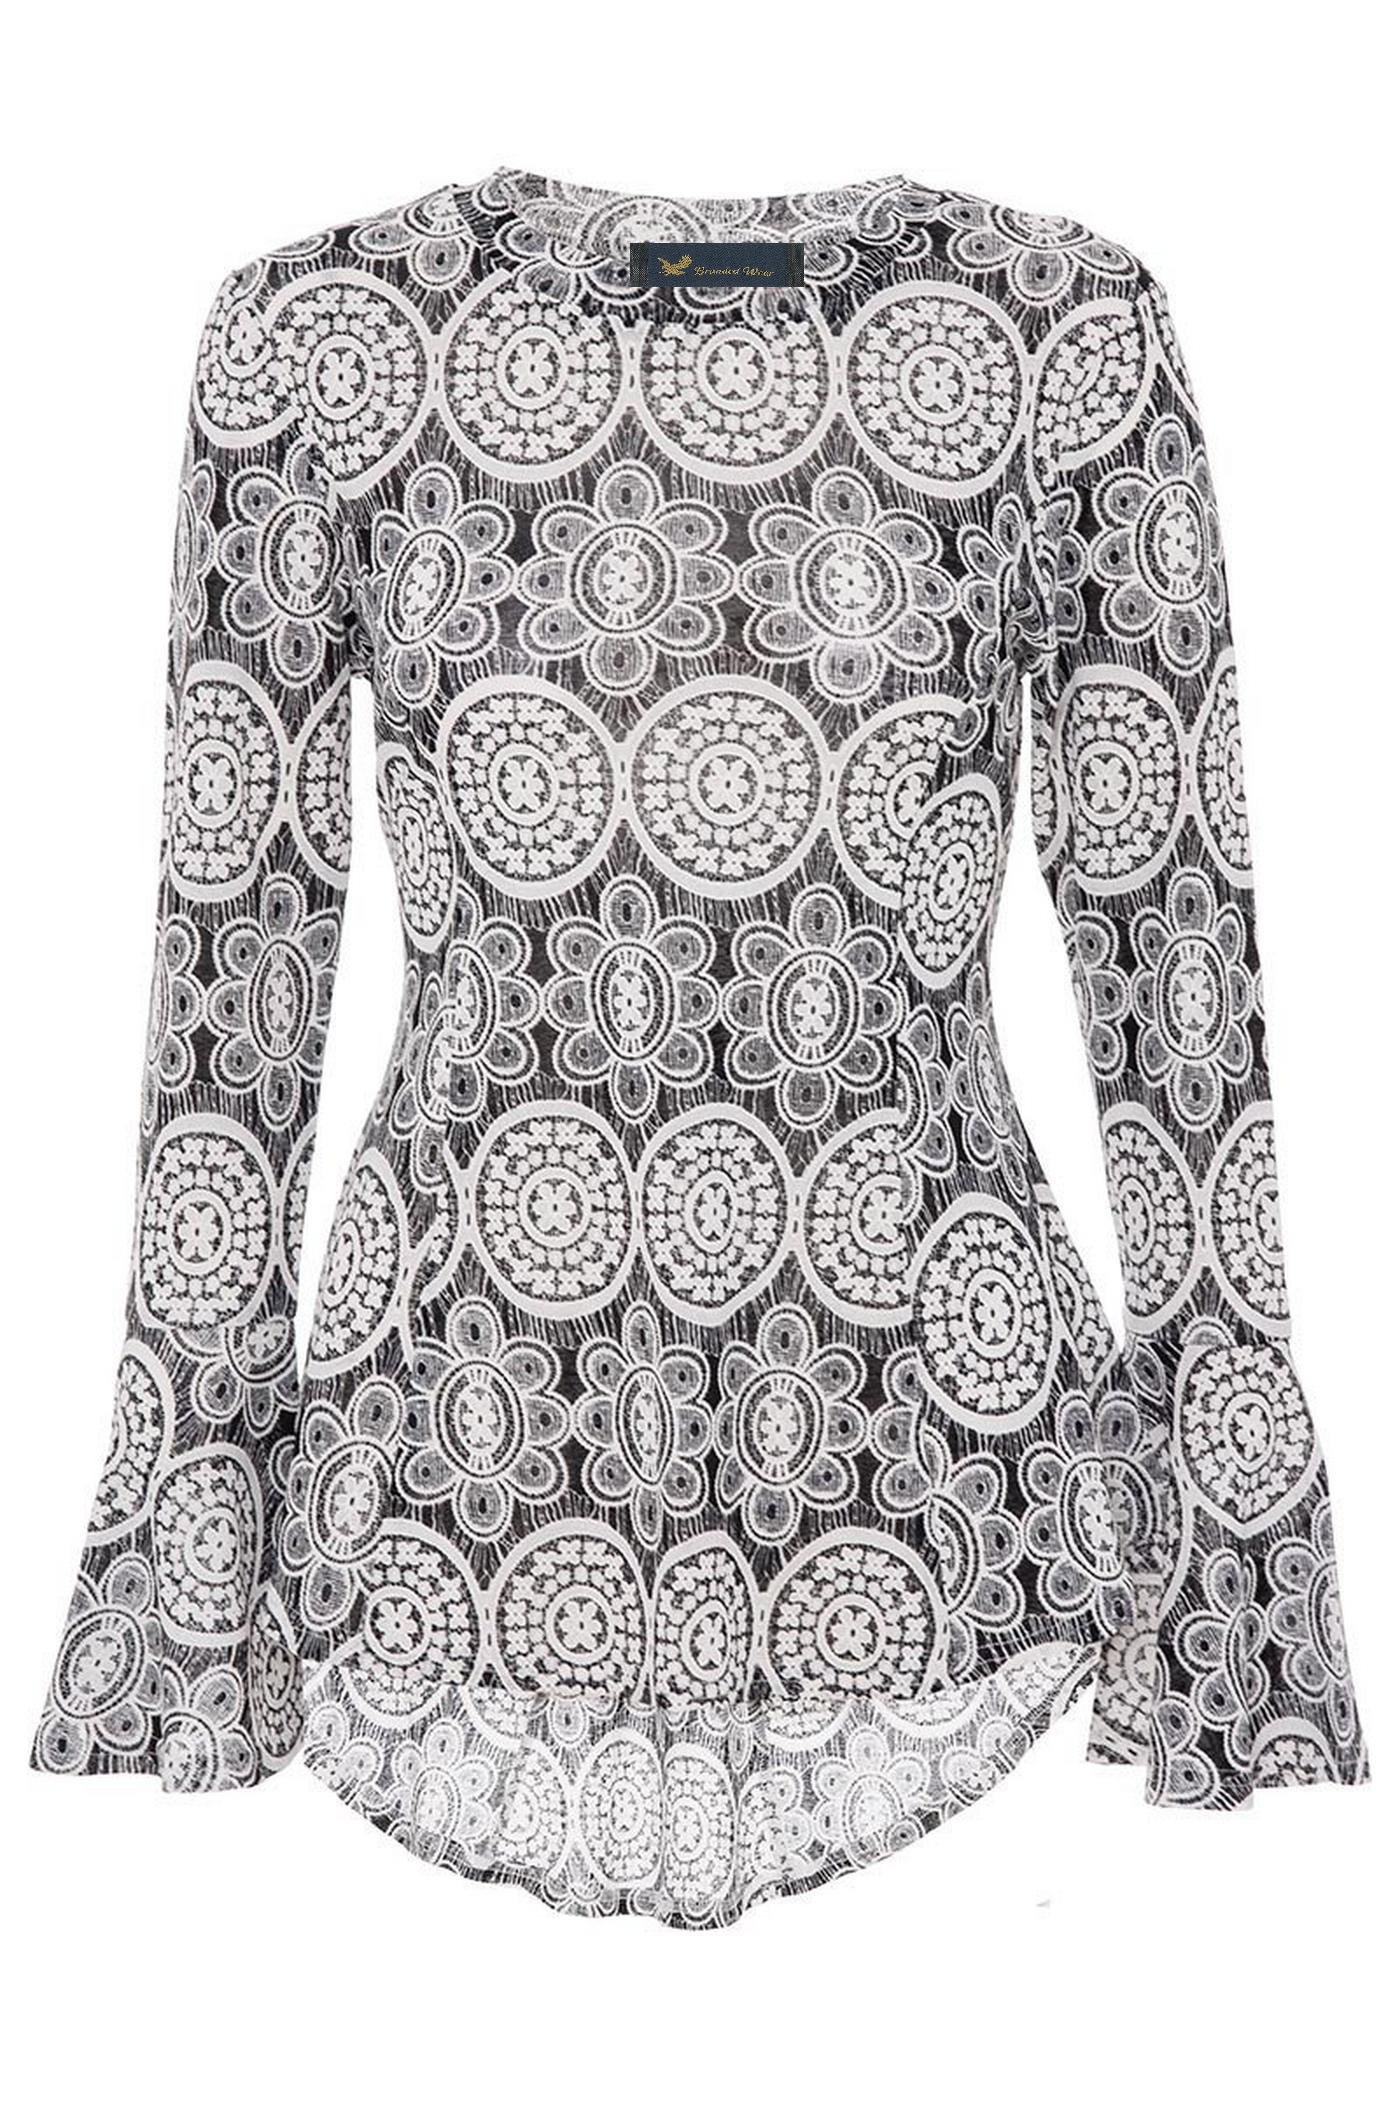 Black And White Lace Print Flute Sleeve Top